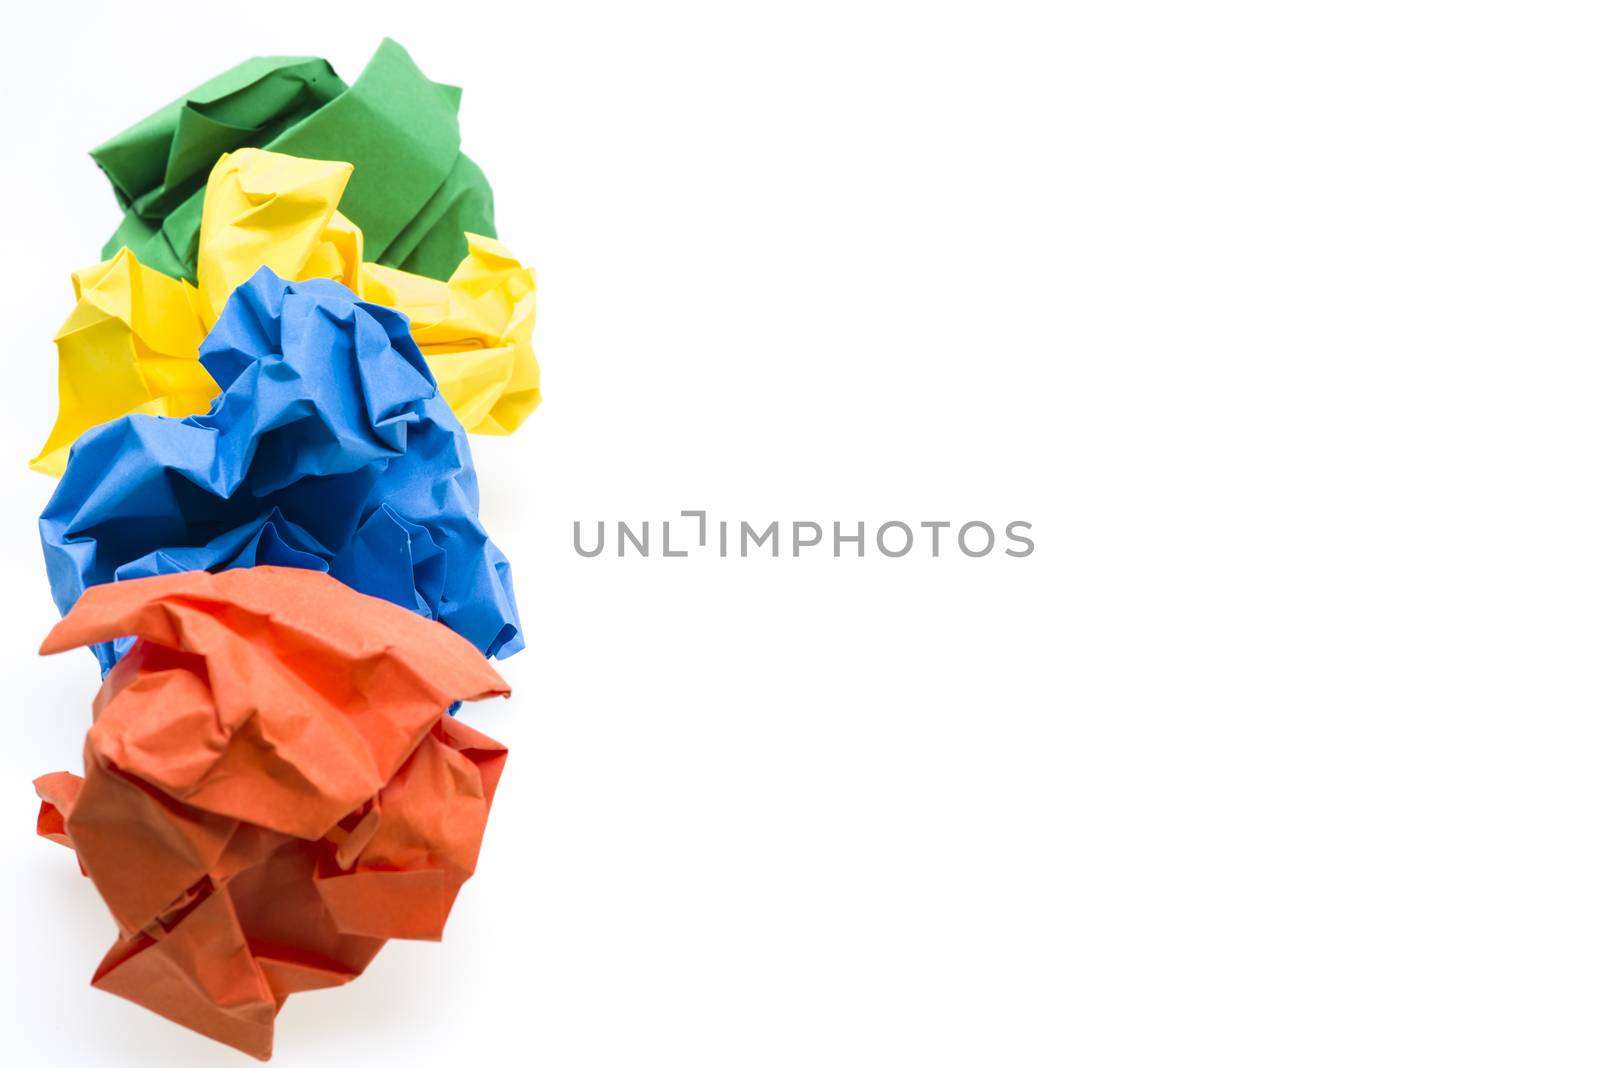 Colored crumpled paper ball in a row by savcoco